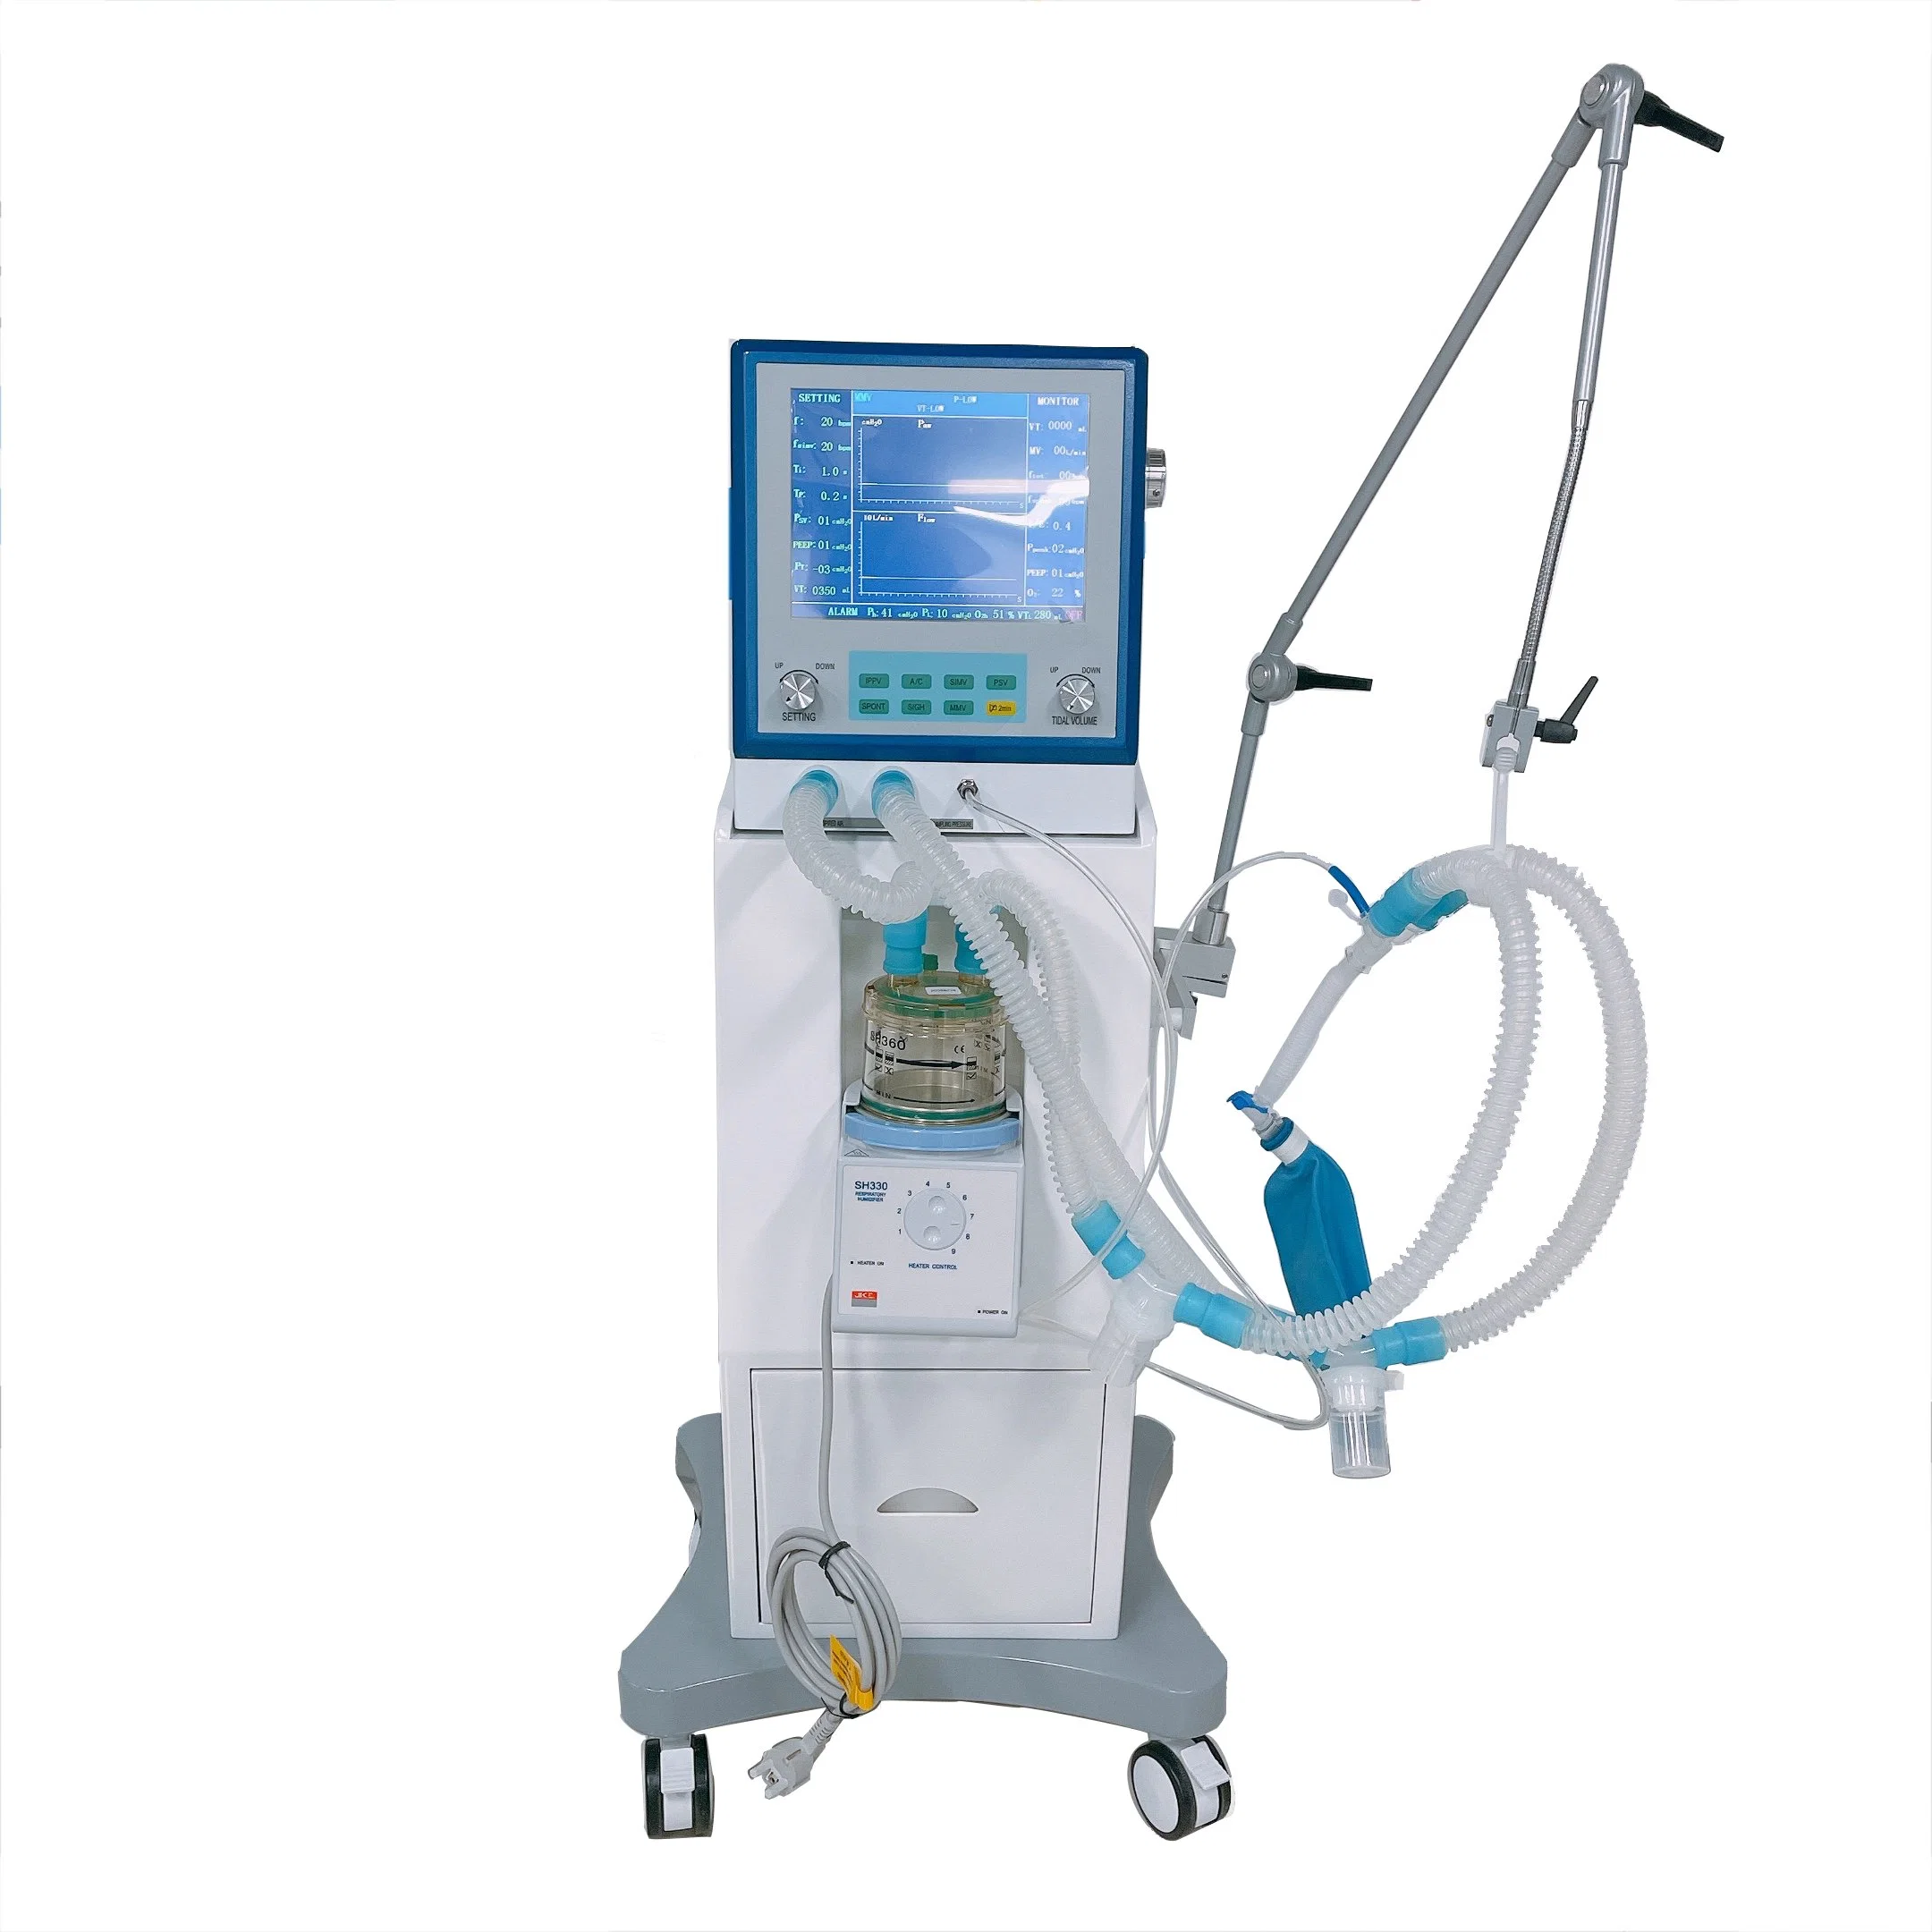 Portable Hospital Surgical Medical Equipment Ventilator for ICU and Clinic Ventilation Machine